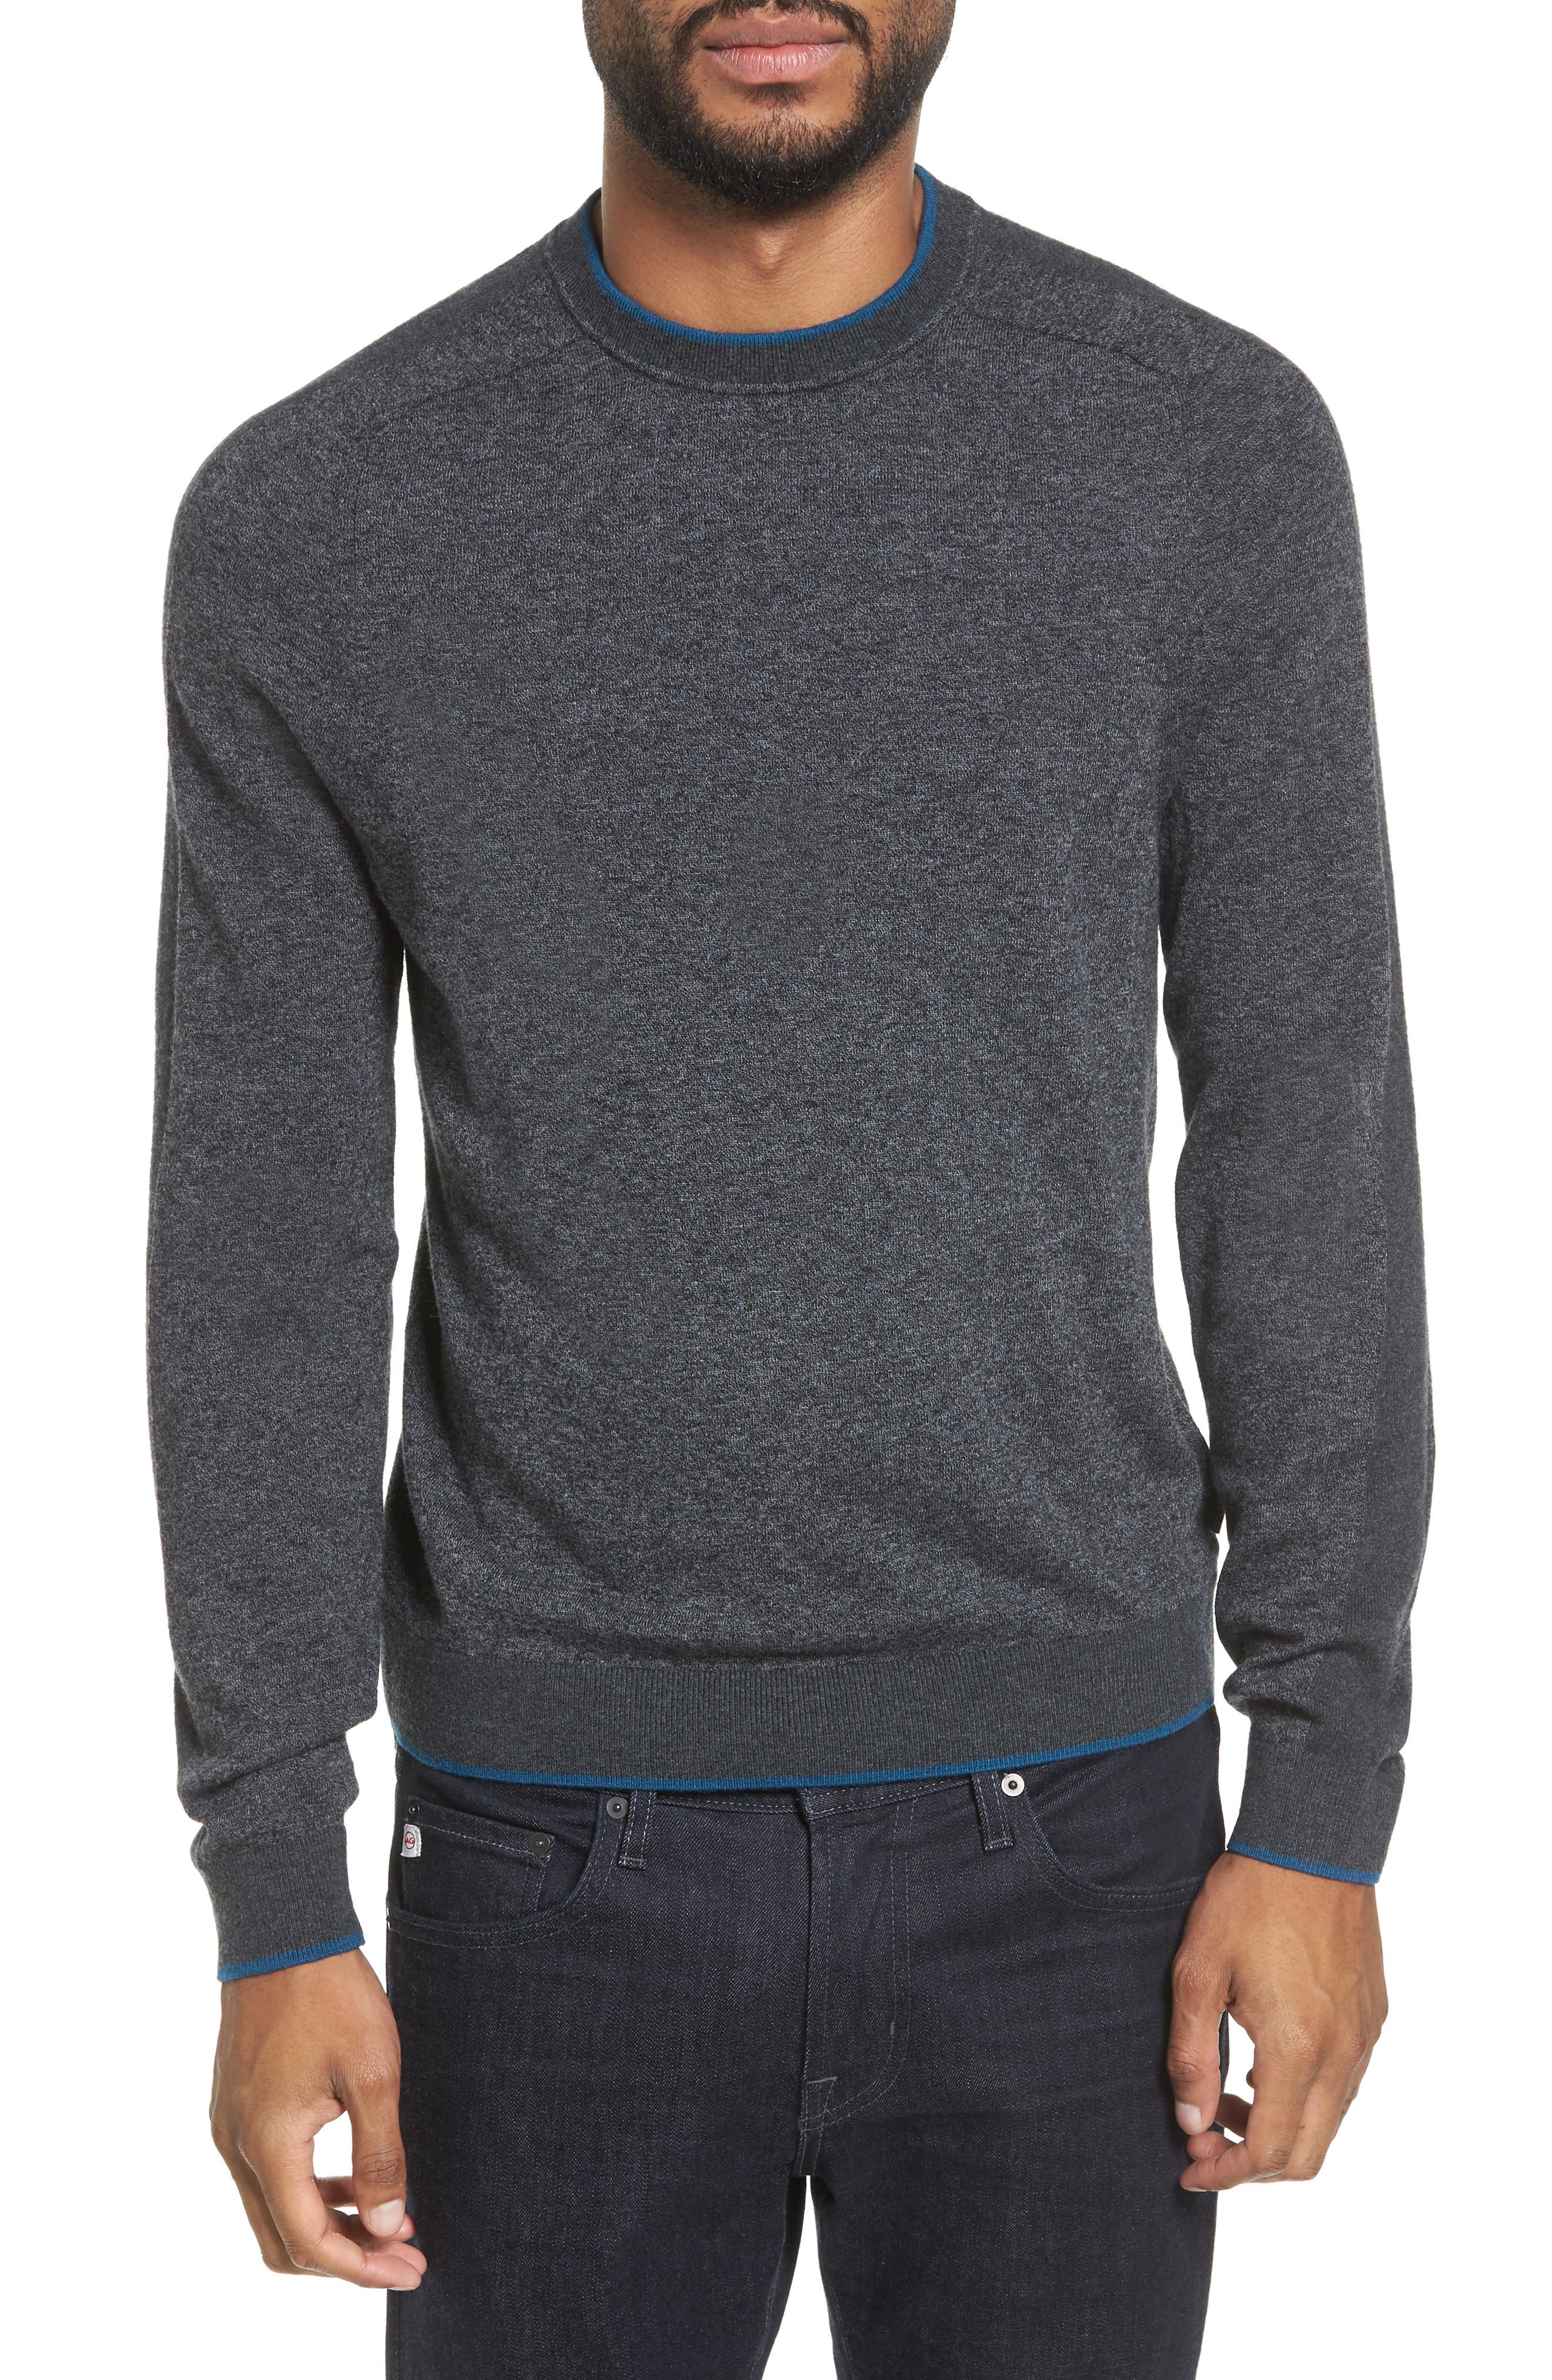 TED BAKER Norpol Crewneck Sweater, Charcoal | ModeSens